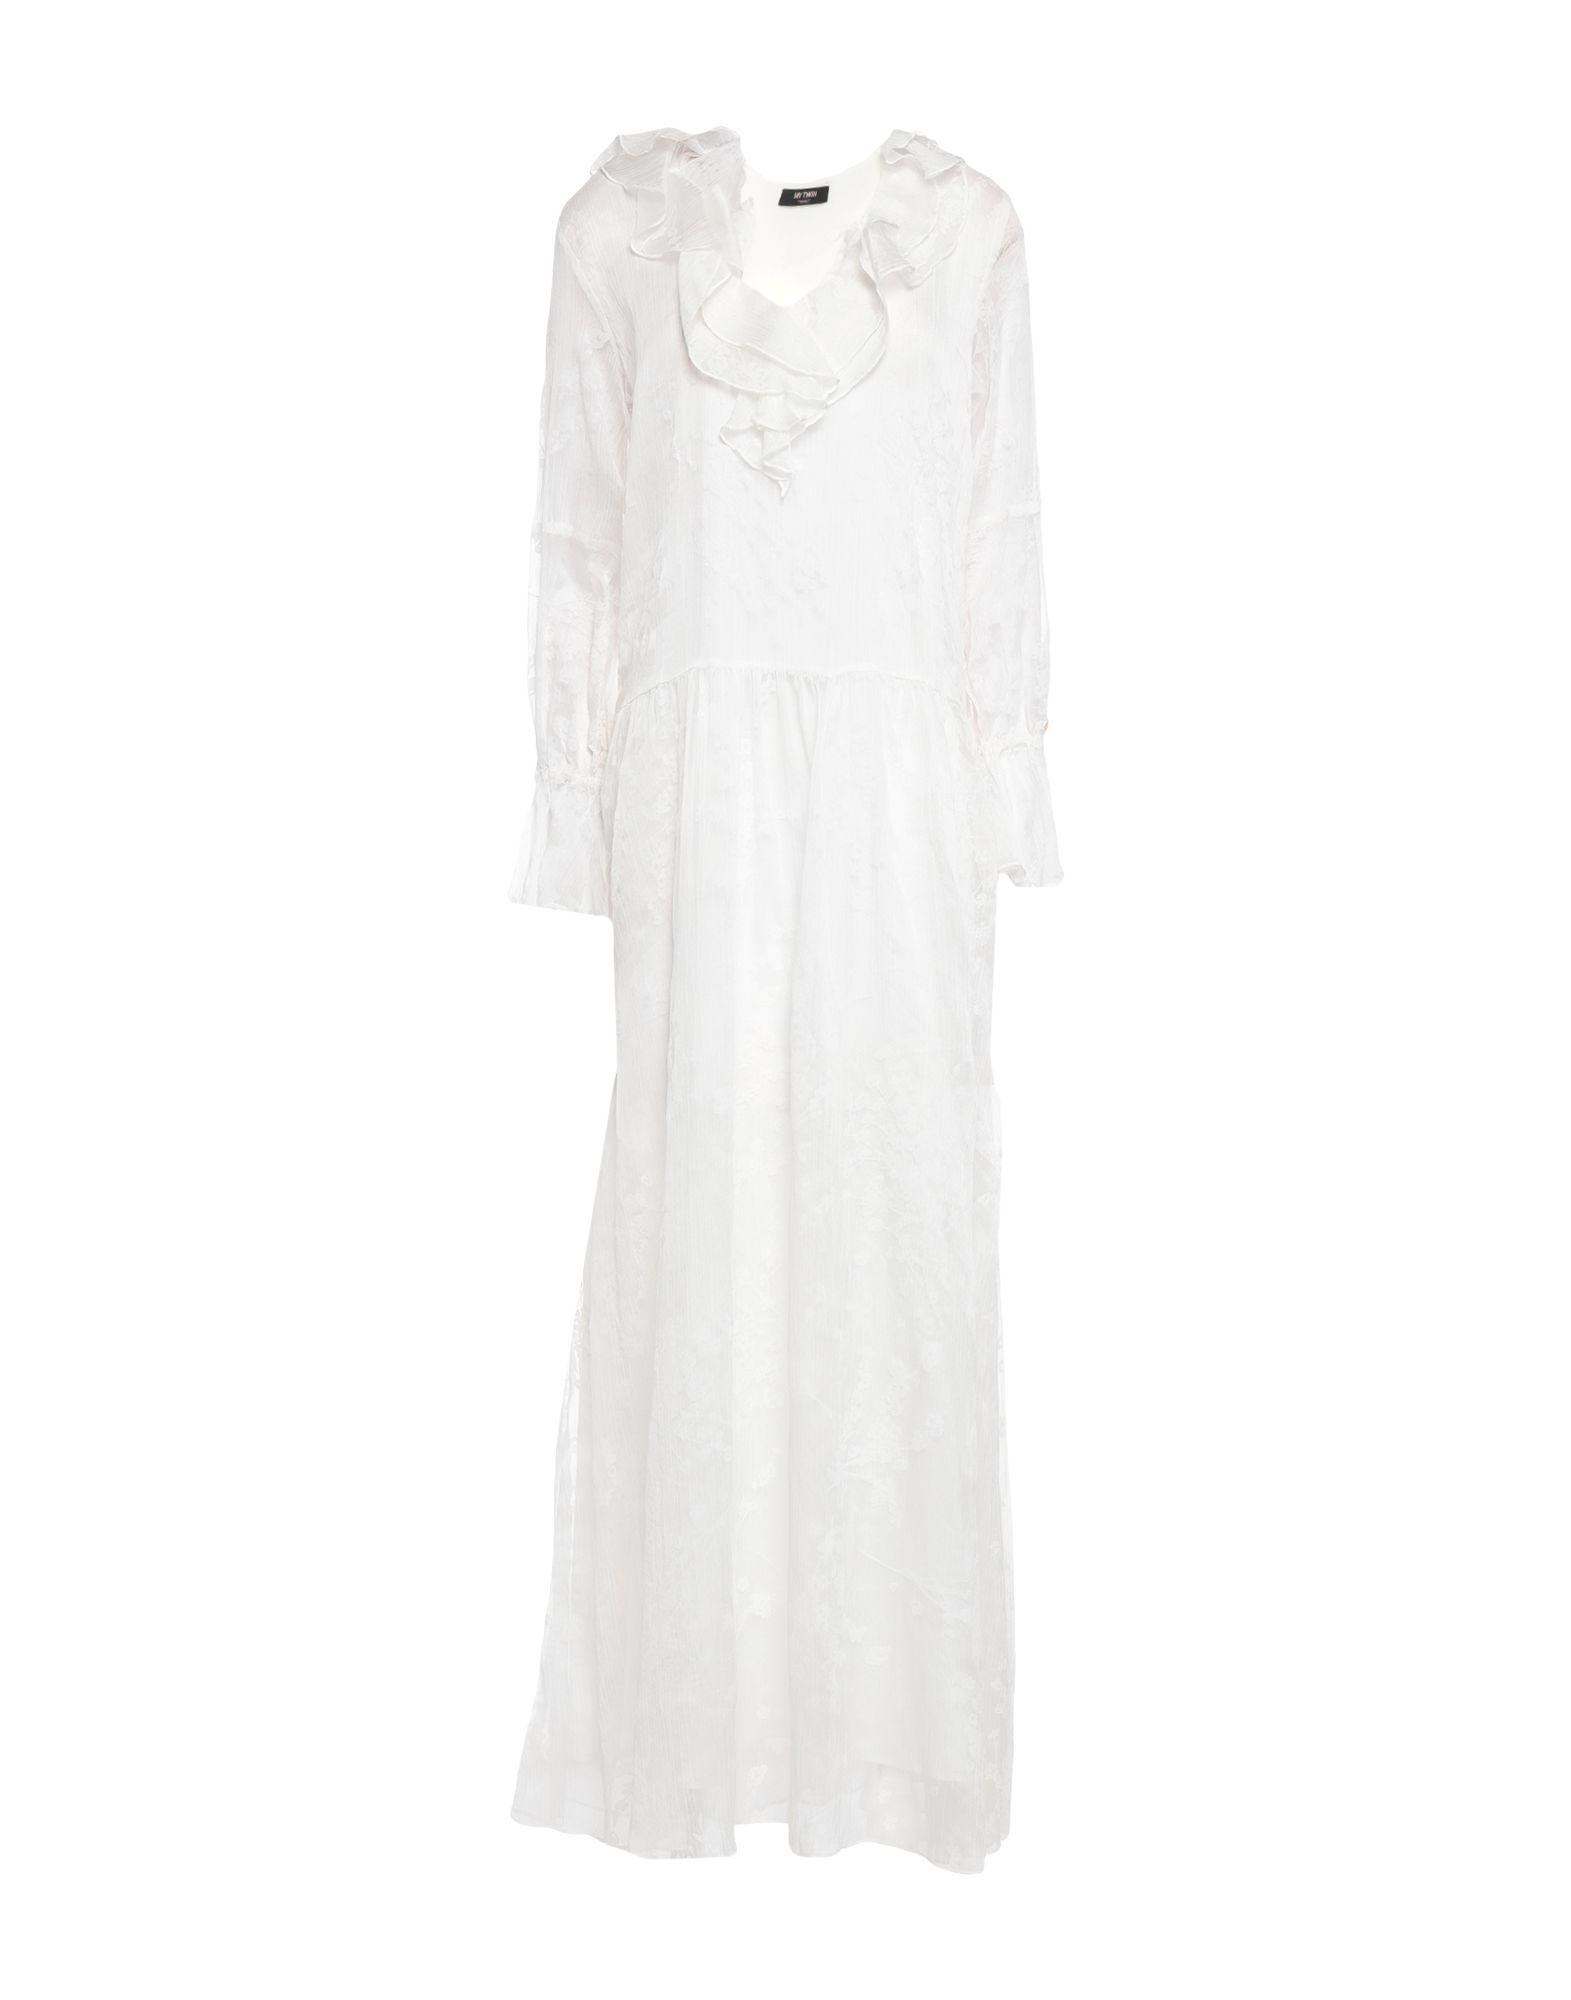 MY TWIN Twinset Synthetic Long Dress in White - Lyst